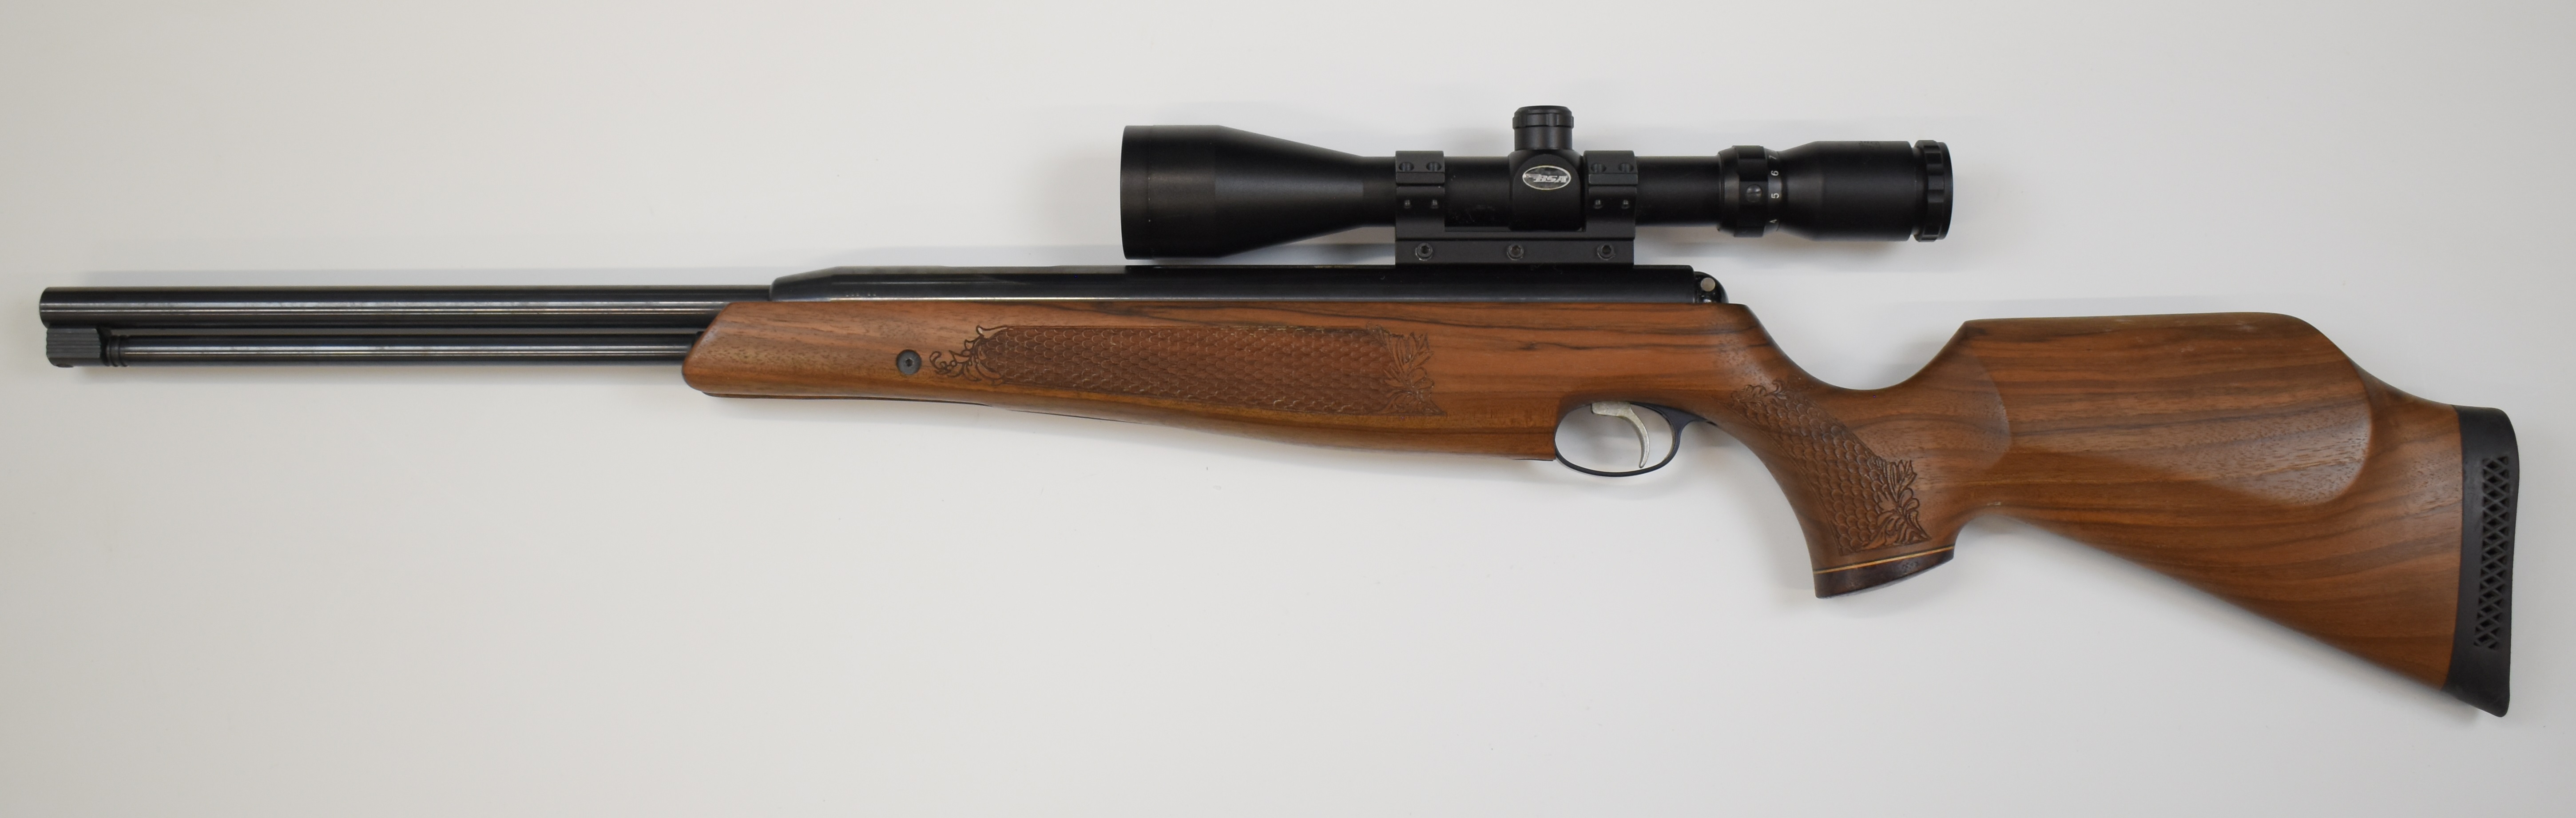 Air Arms TX200 .22 under-lever air rifle with carved semi-pistol grip and forend, adjustable - Image 6 of 9